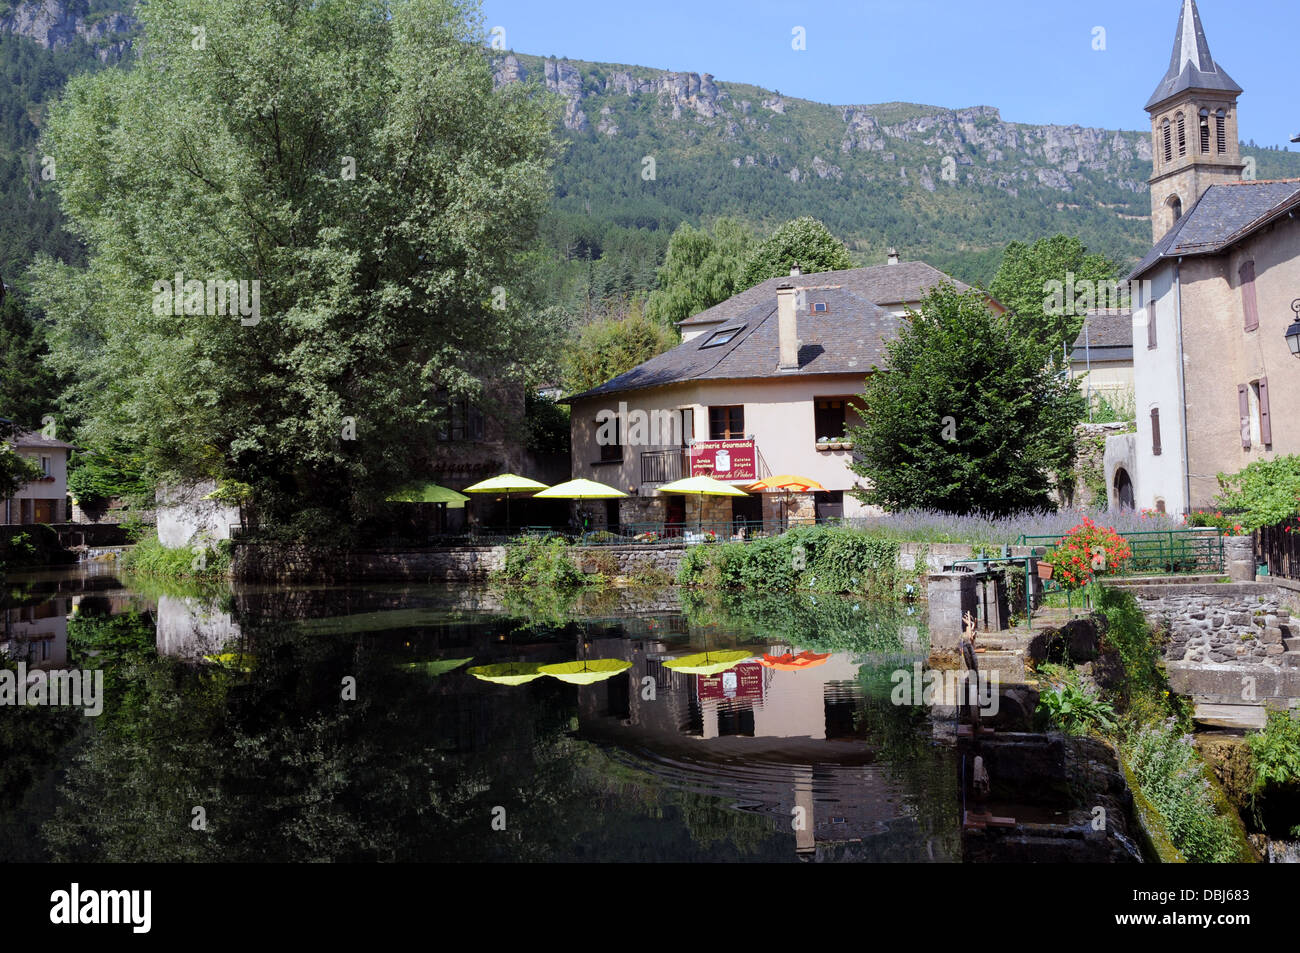 Umbrellas from the La Source de Pecher restaurant are reflected in the crystal clear waters of the Vibron river. Stock Photo